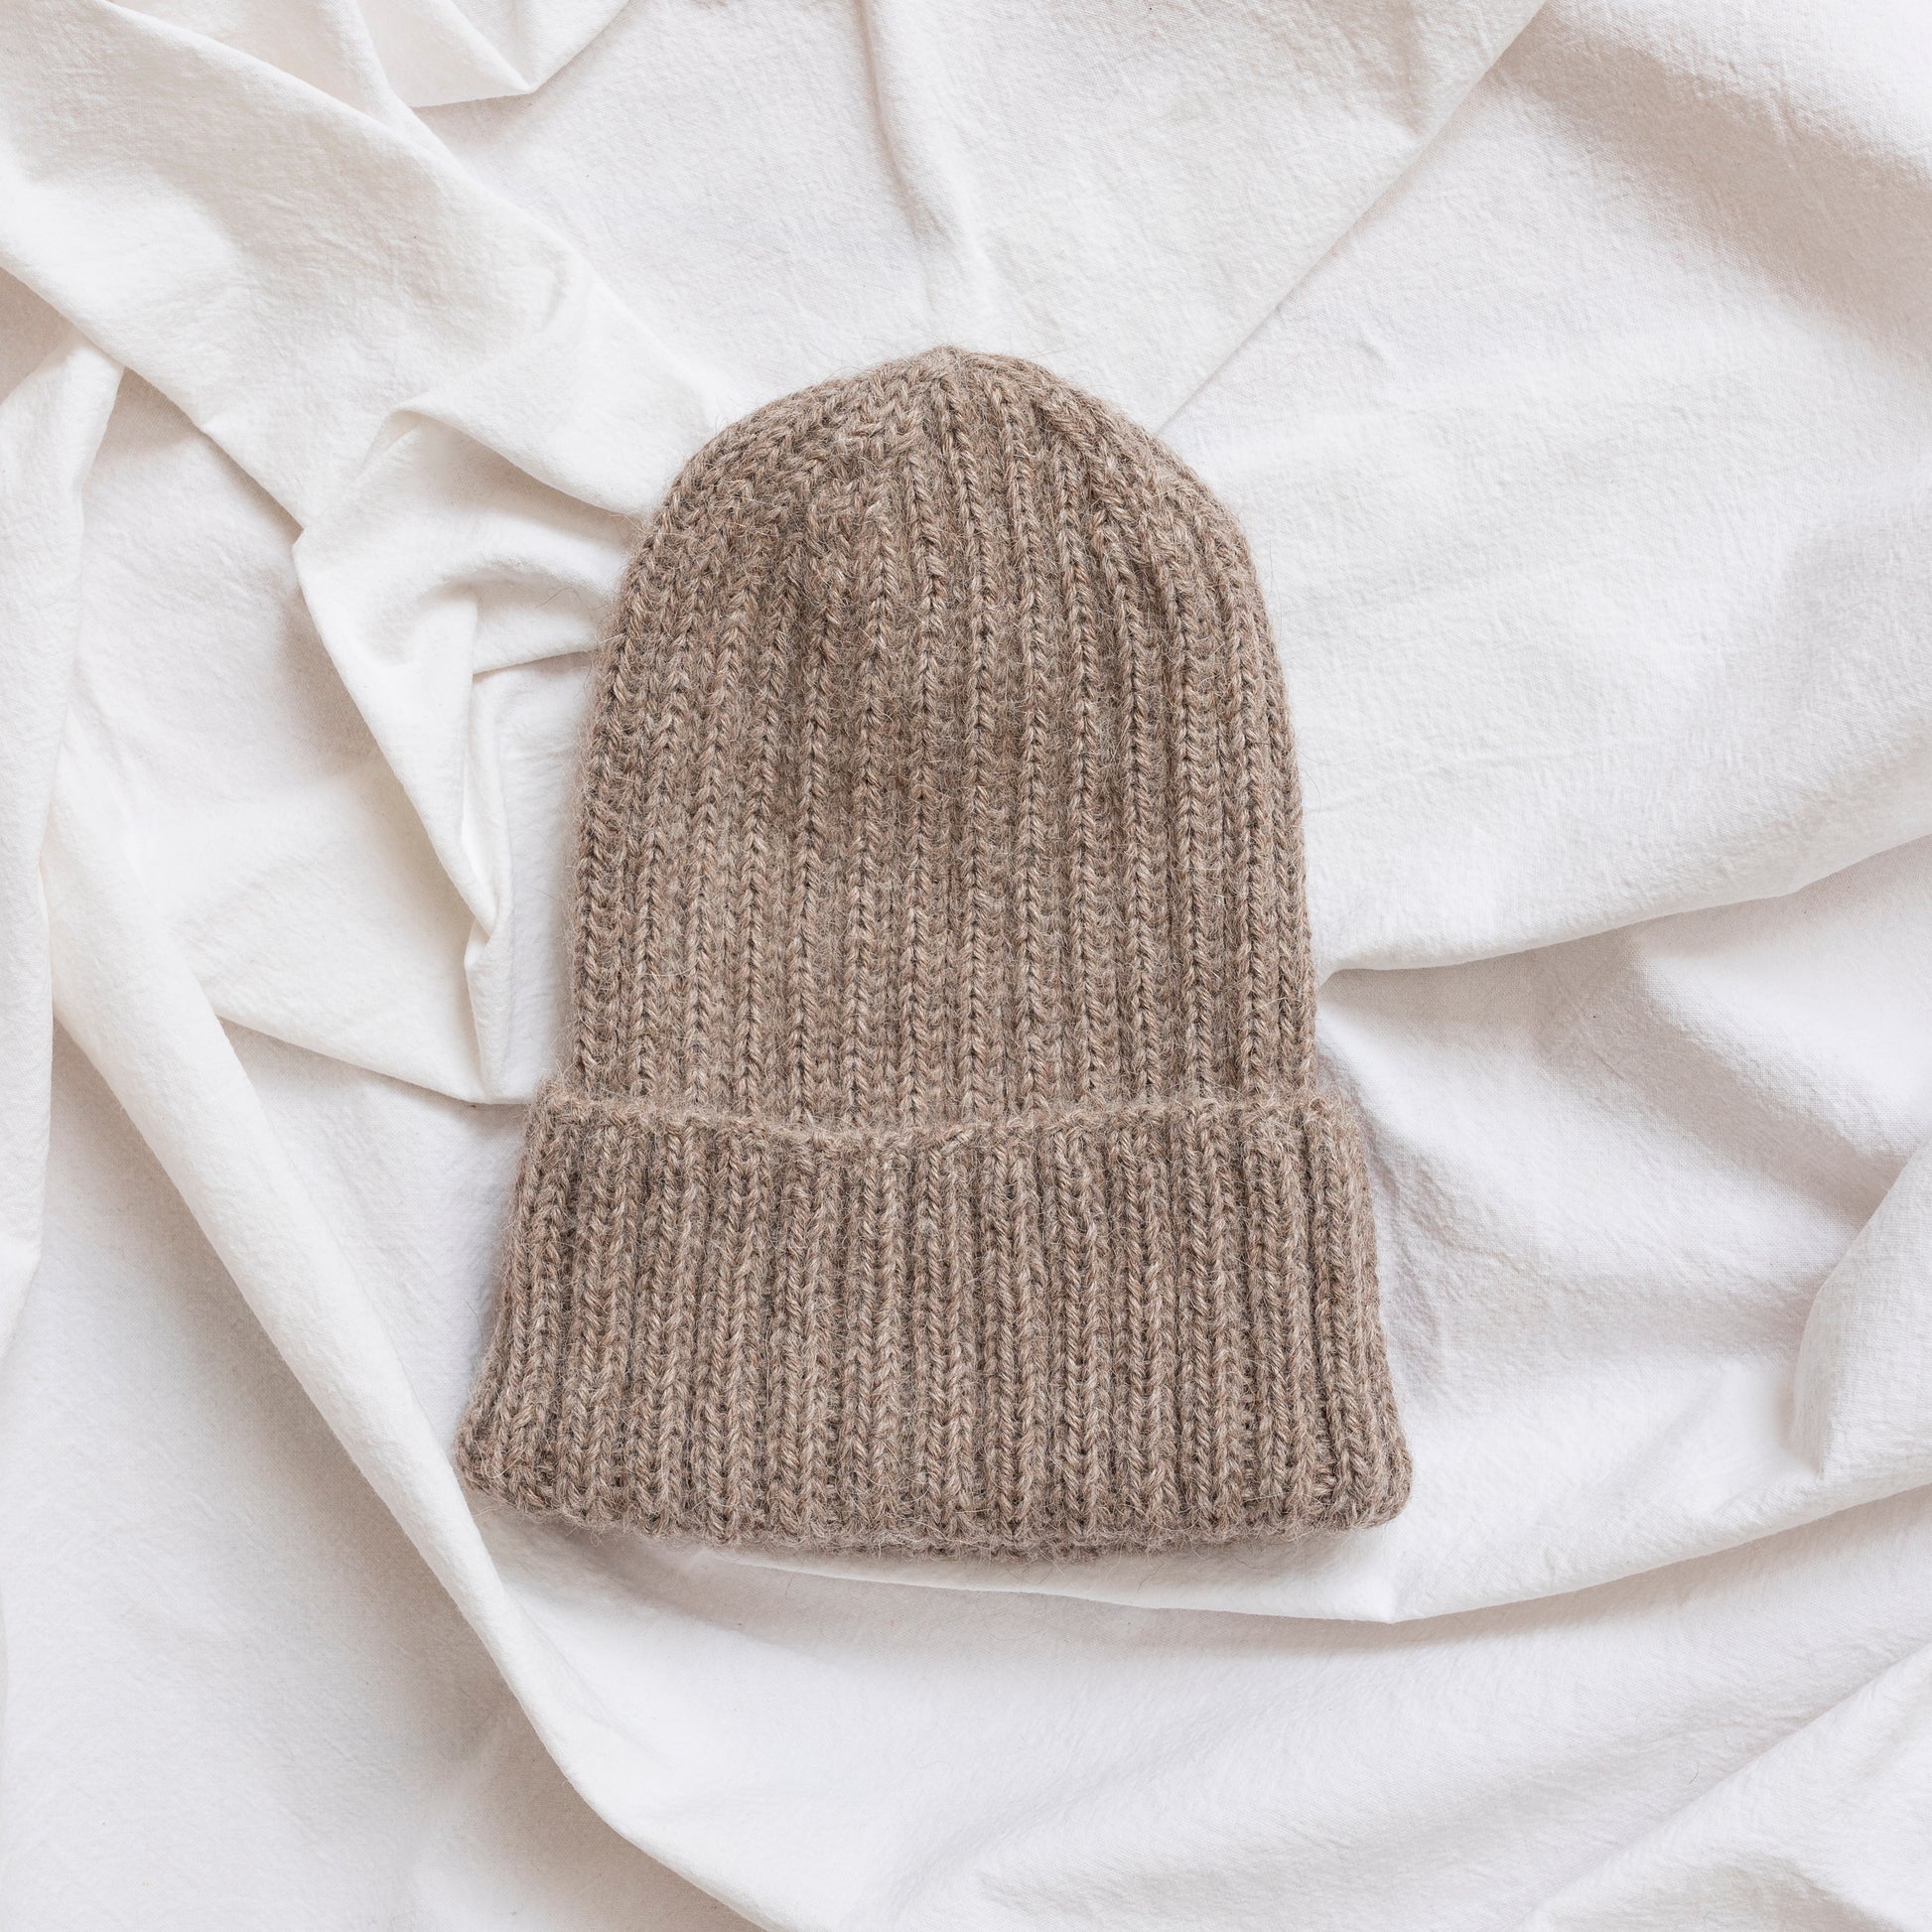 Oatmeal coloured soft beanie with rib detail made from alpaca wool.